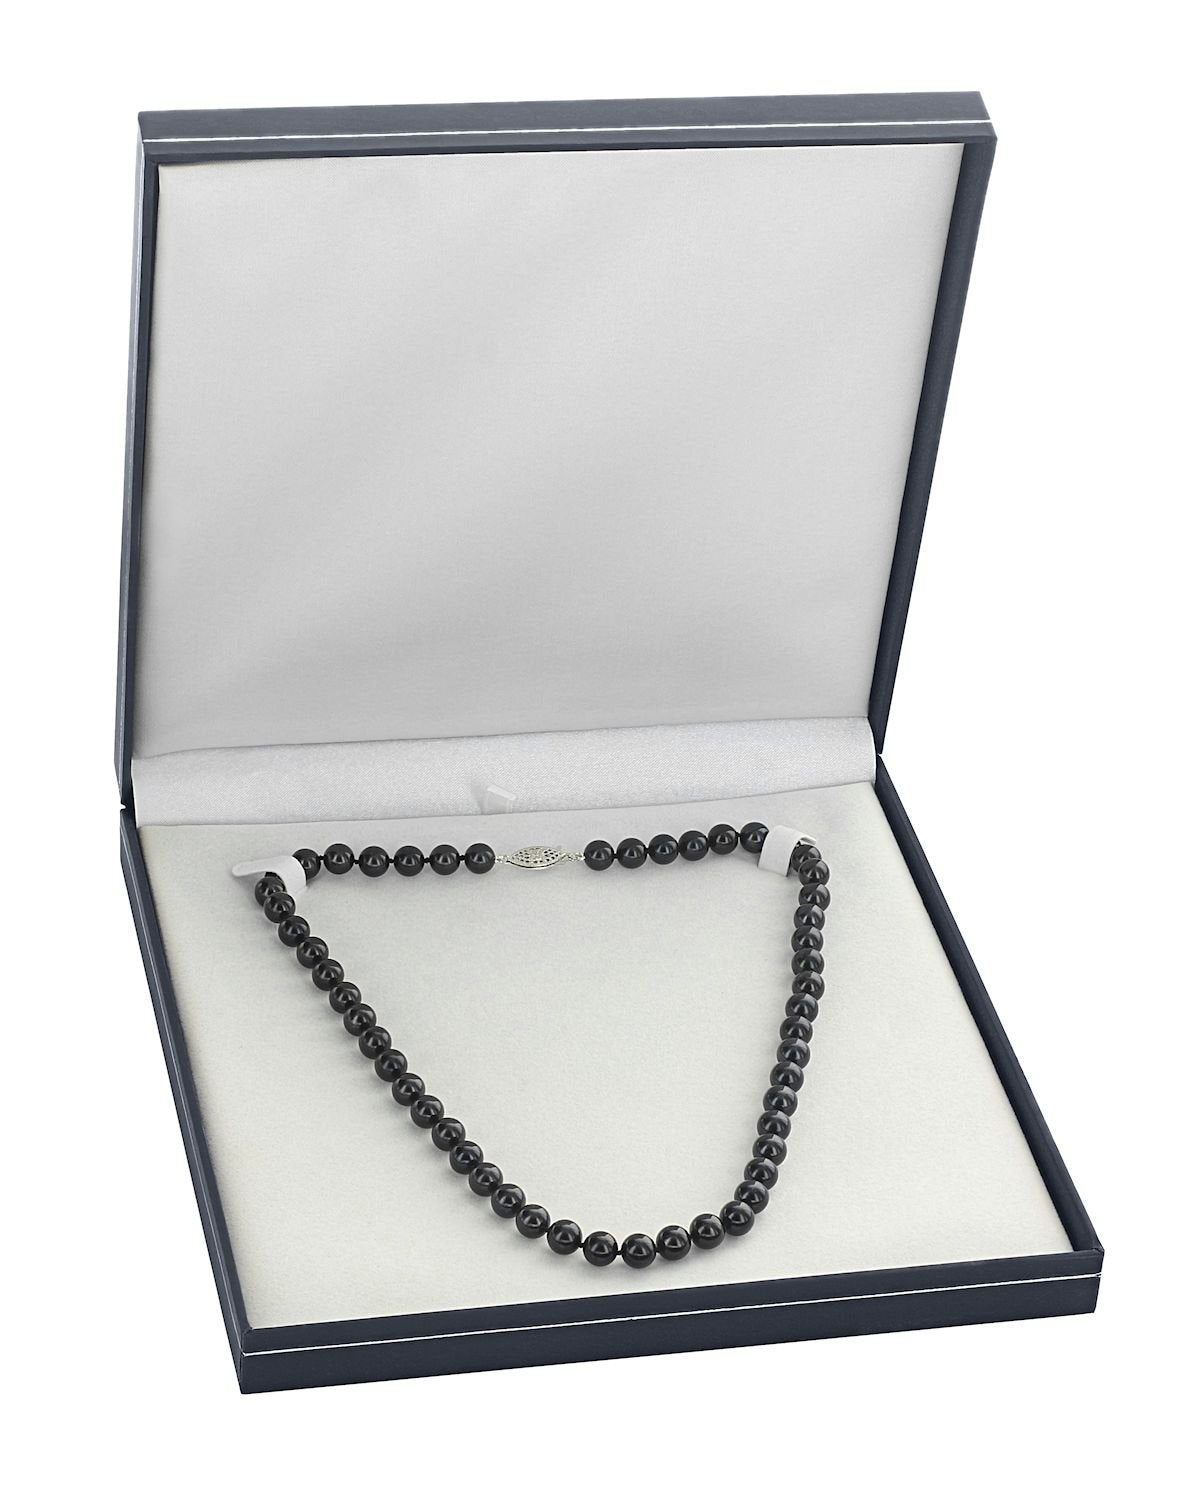  8.0-8.5mm Japanese Akoya Black Pearl Necklace- AAA Quality - Fourth Image 